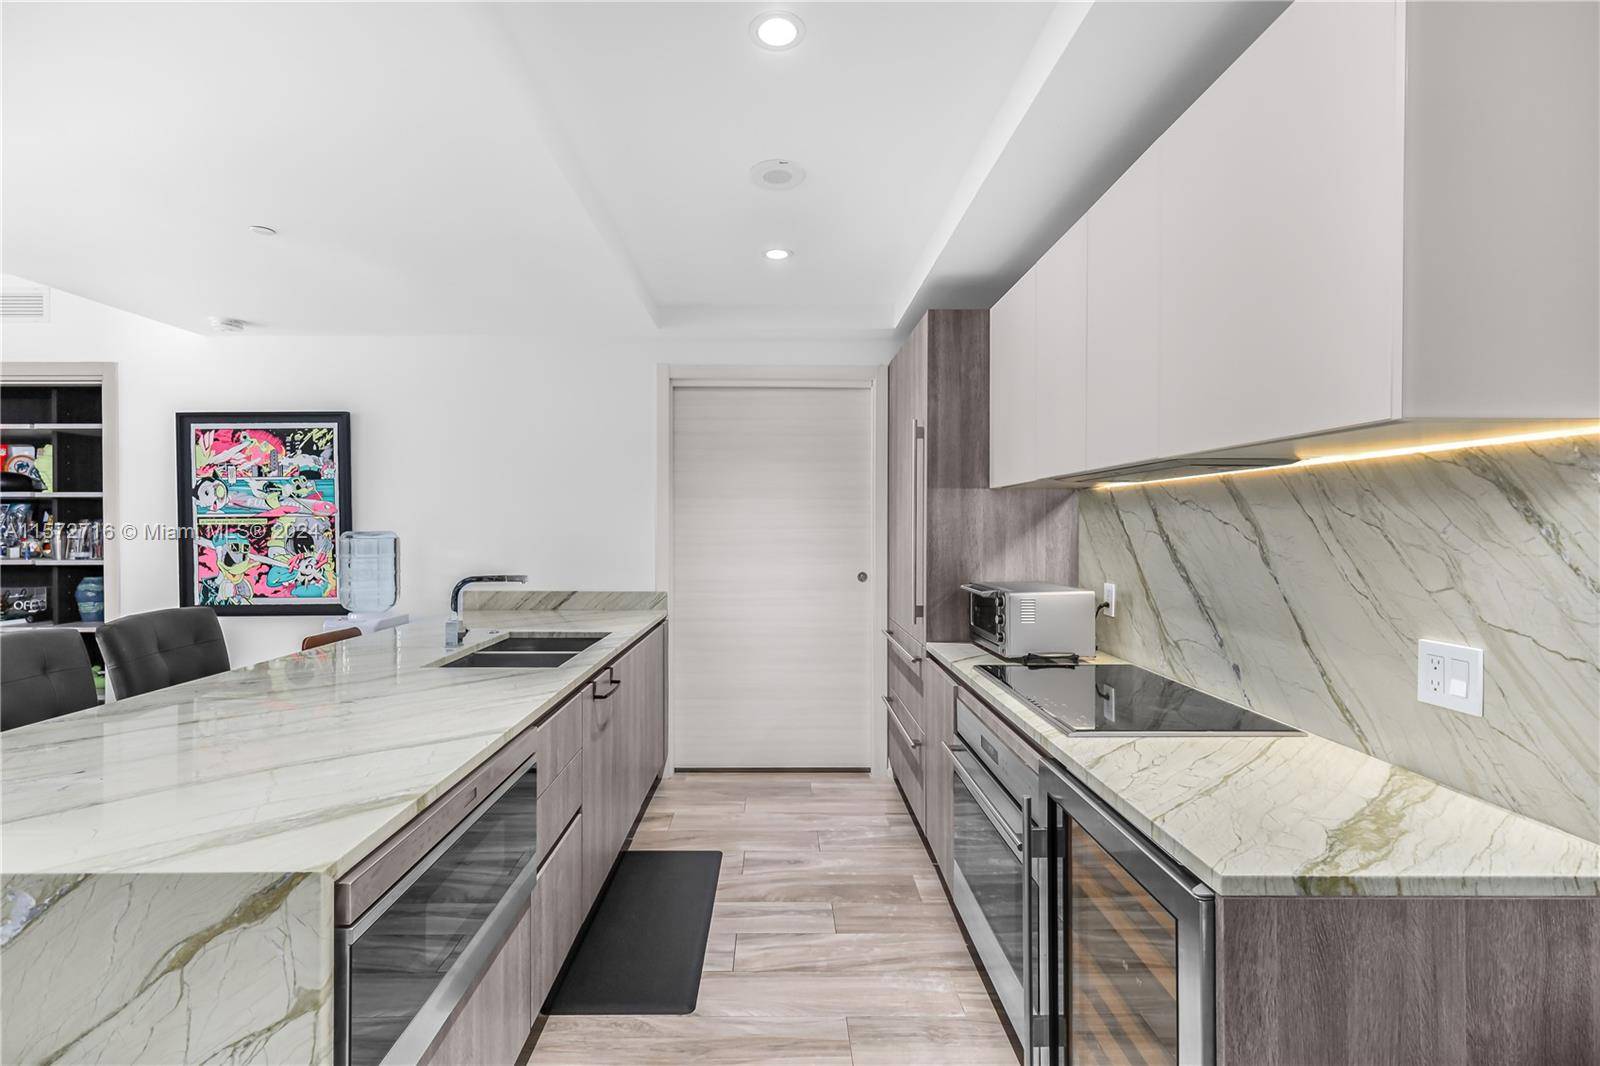 Luxury 2 bedroom with a Den at the SLS LUX, a luxury new construction at the heart of Brickell and a few steps from the mall at Brickell City Centre.